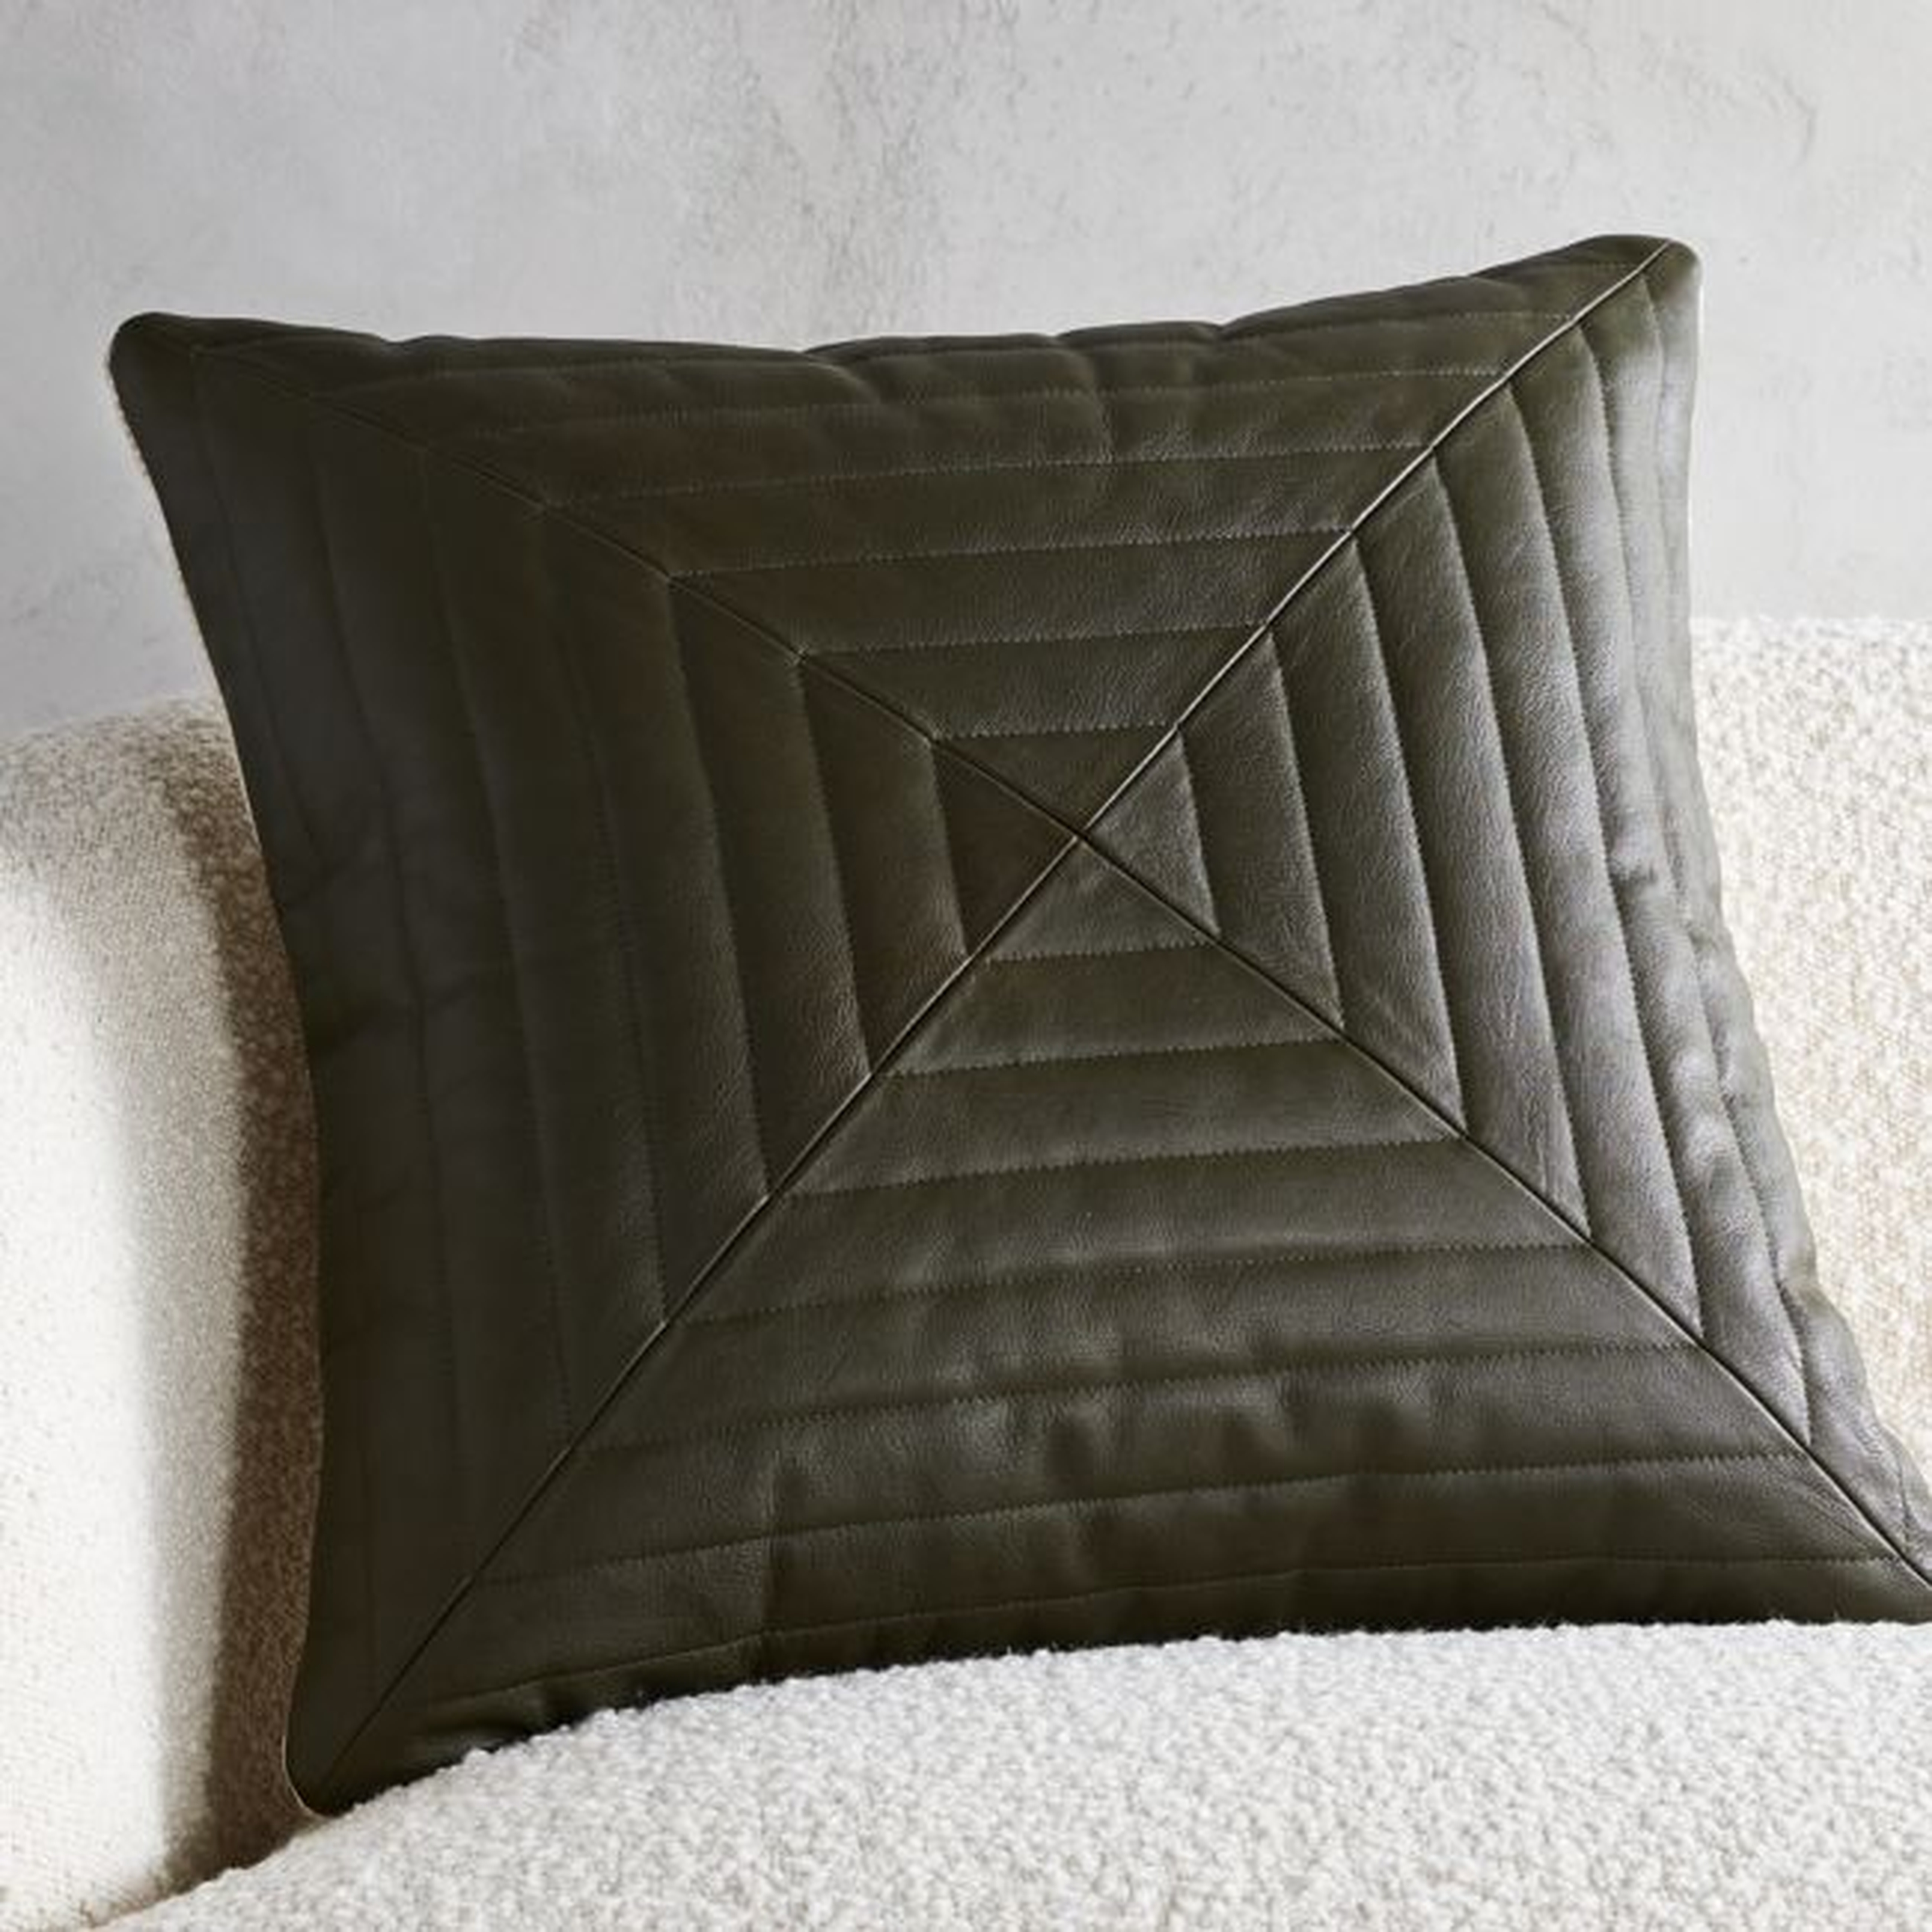 20" Odette Olive Leather Pillow with Feather-Down Insert - CB2